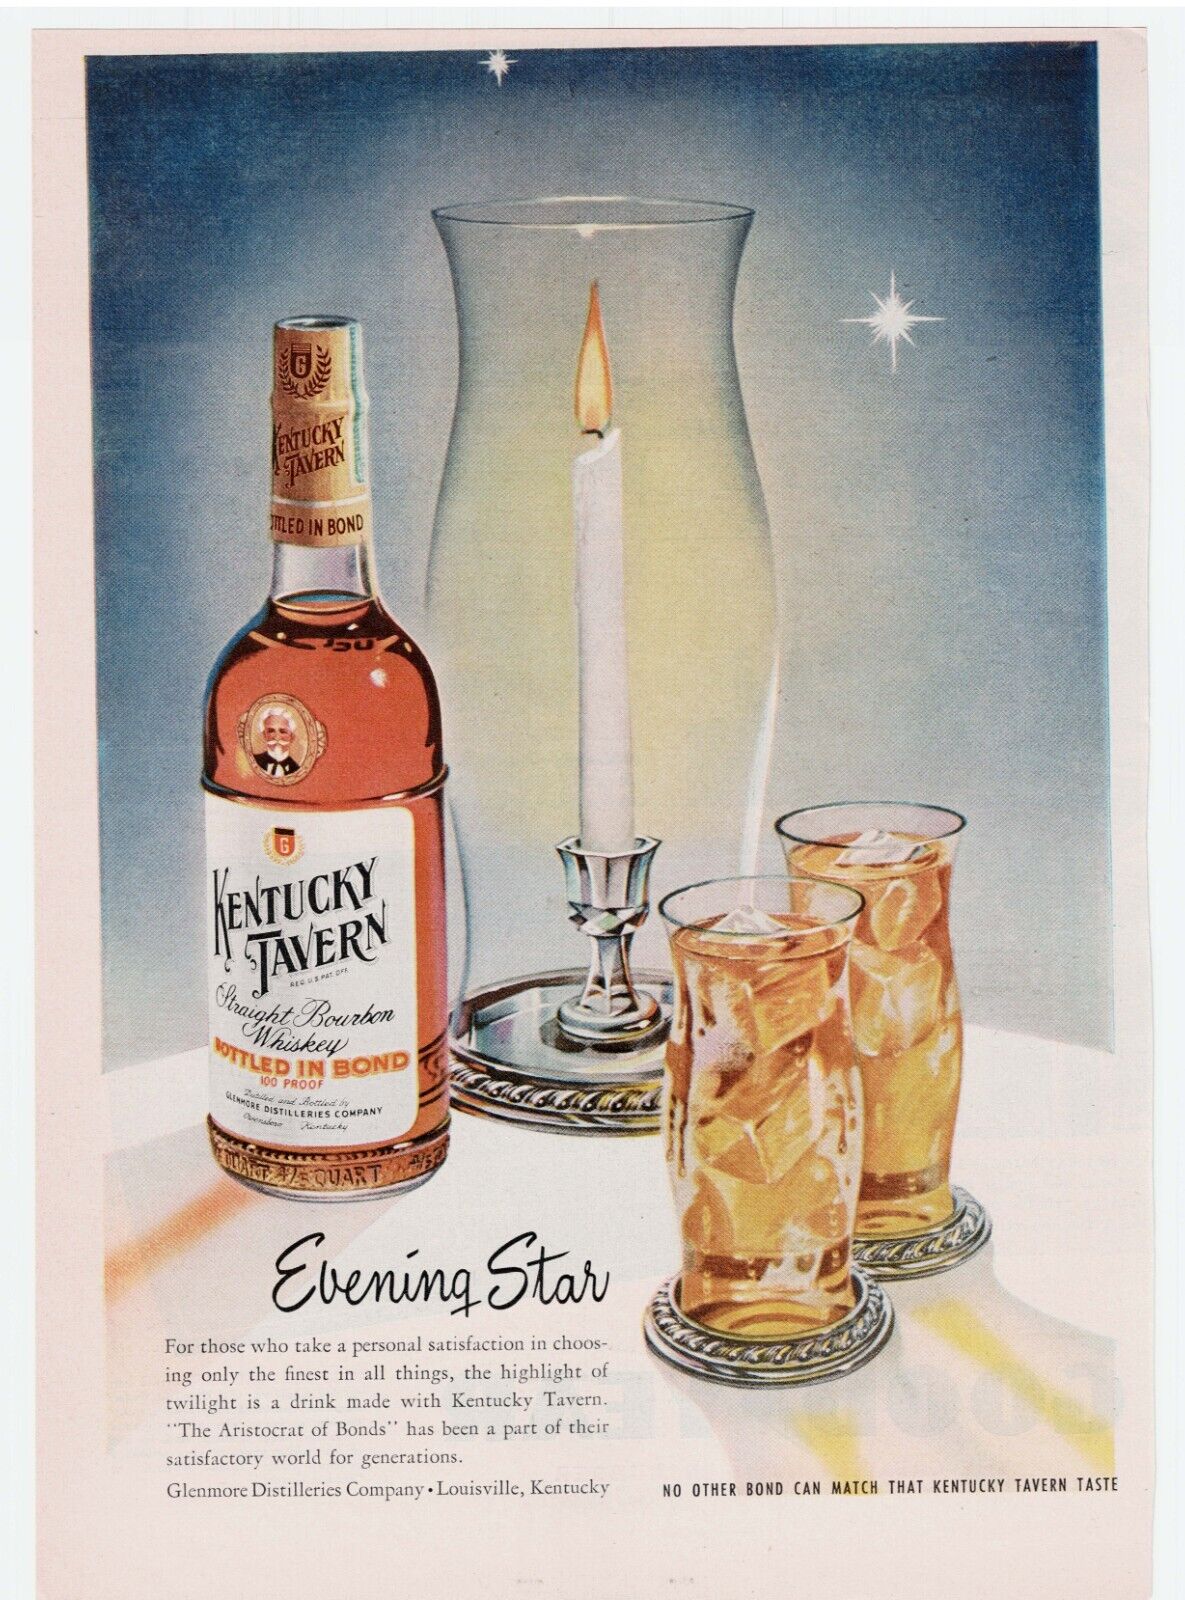 Vintage ad for Kentucky Tavern bourbon showcasing a decorative punchbowl and bottle. Likely Illustrated by John C Howard.